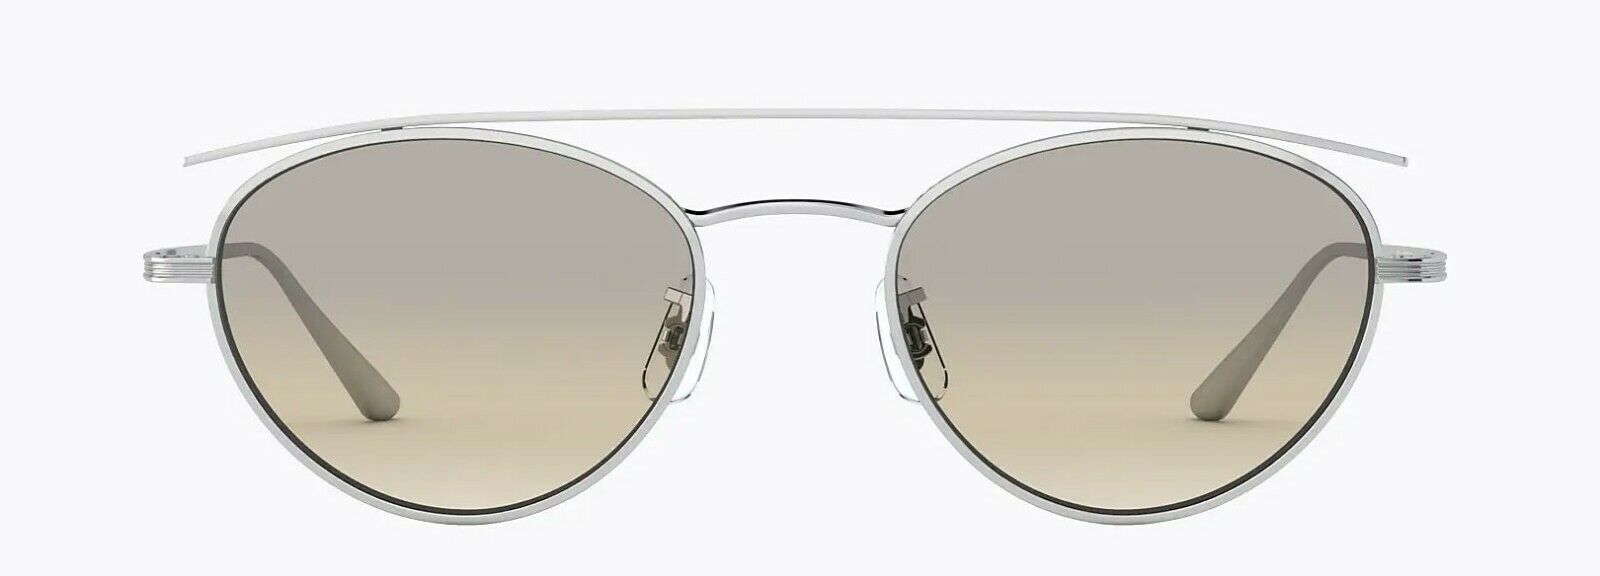 Oliver Peoples Sunglasses 1258ST 503632 The Row Hightree Silver / Shale Gradient-827934432611-classypw.com-2